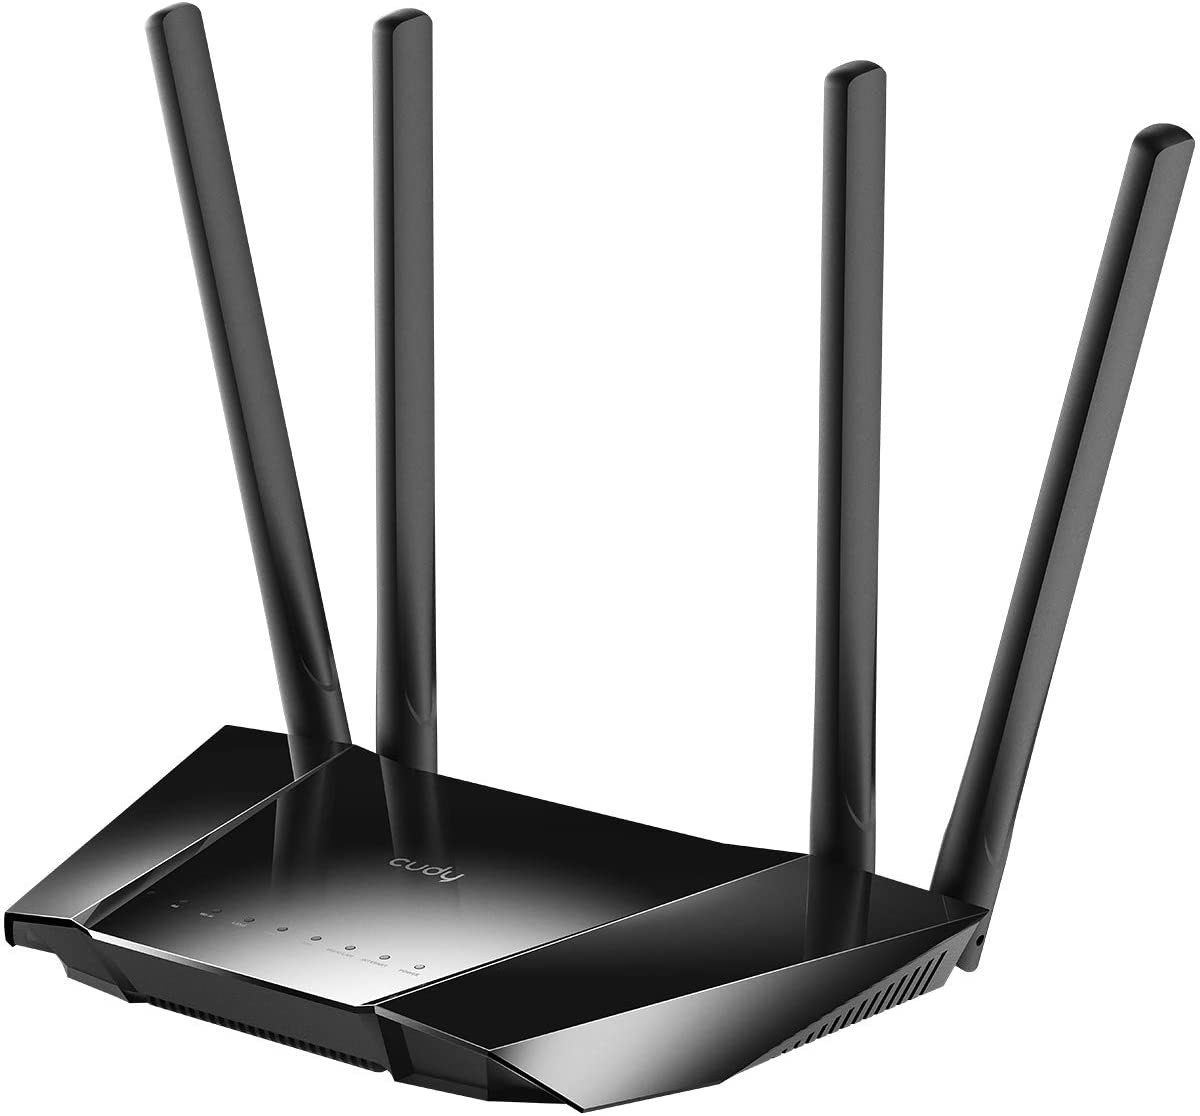 Cudy LT400 4G LTE Wireless Router, 300Mbps, LAN / WAN Port, No configuration, 4 High Gain Antennas, FDD and TDD, VPN, DDNS, SIM Card Plug And Play